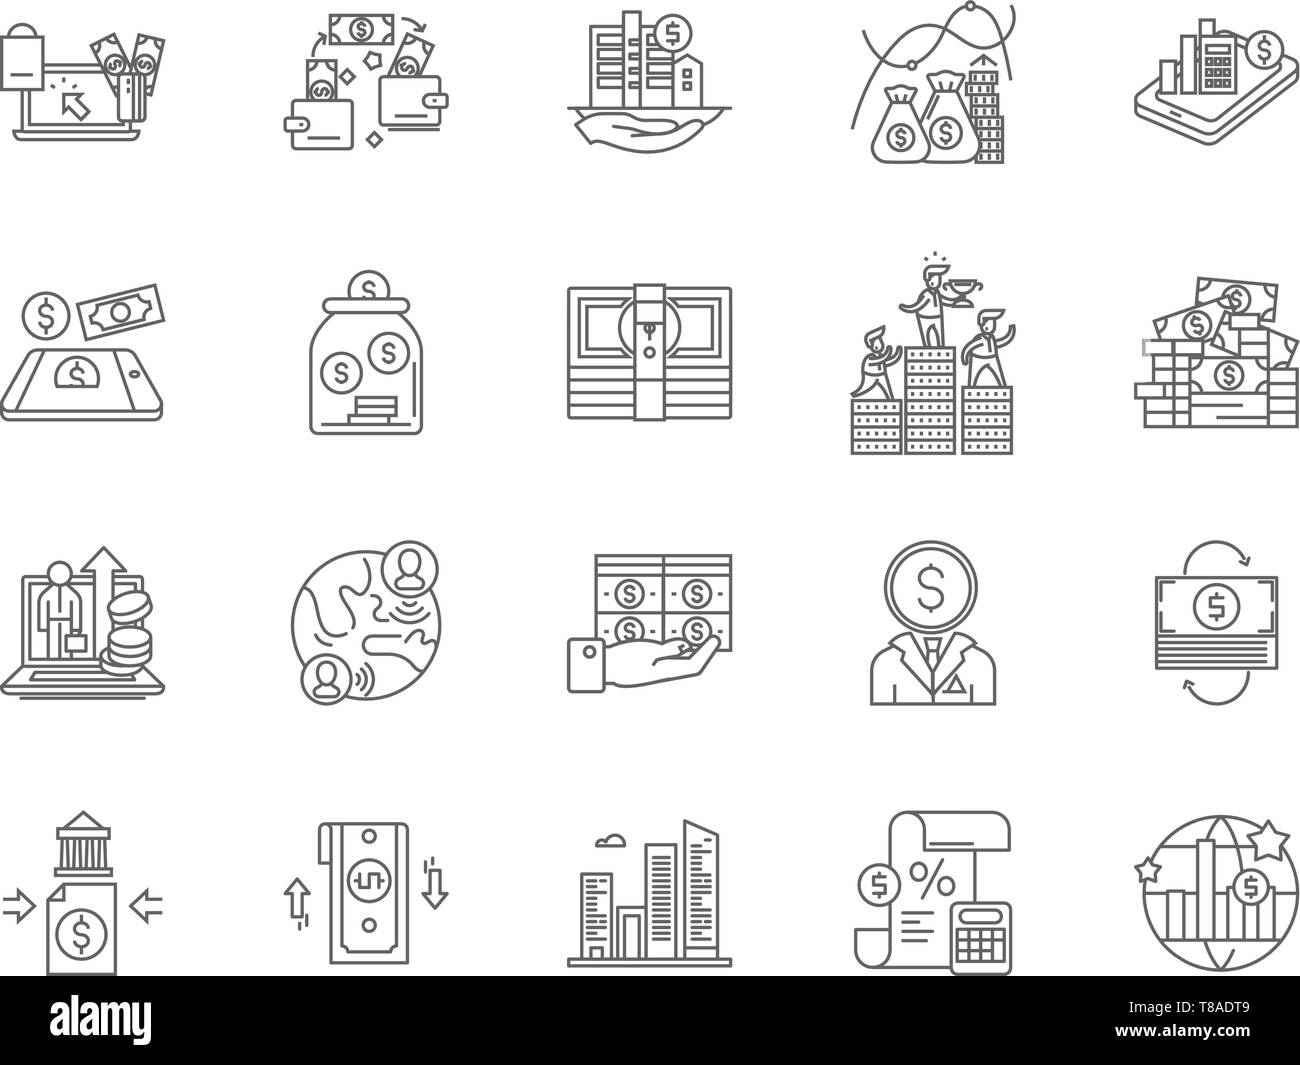 Capital markets line icons, signs, vector set, outline illustration concept  Stock Vector